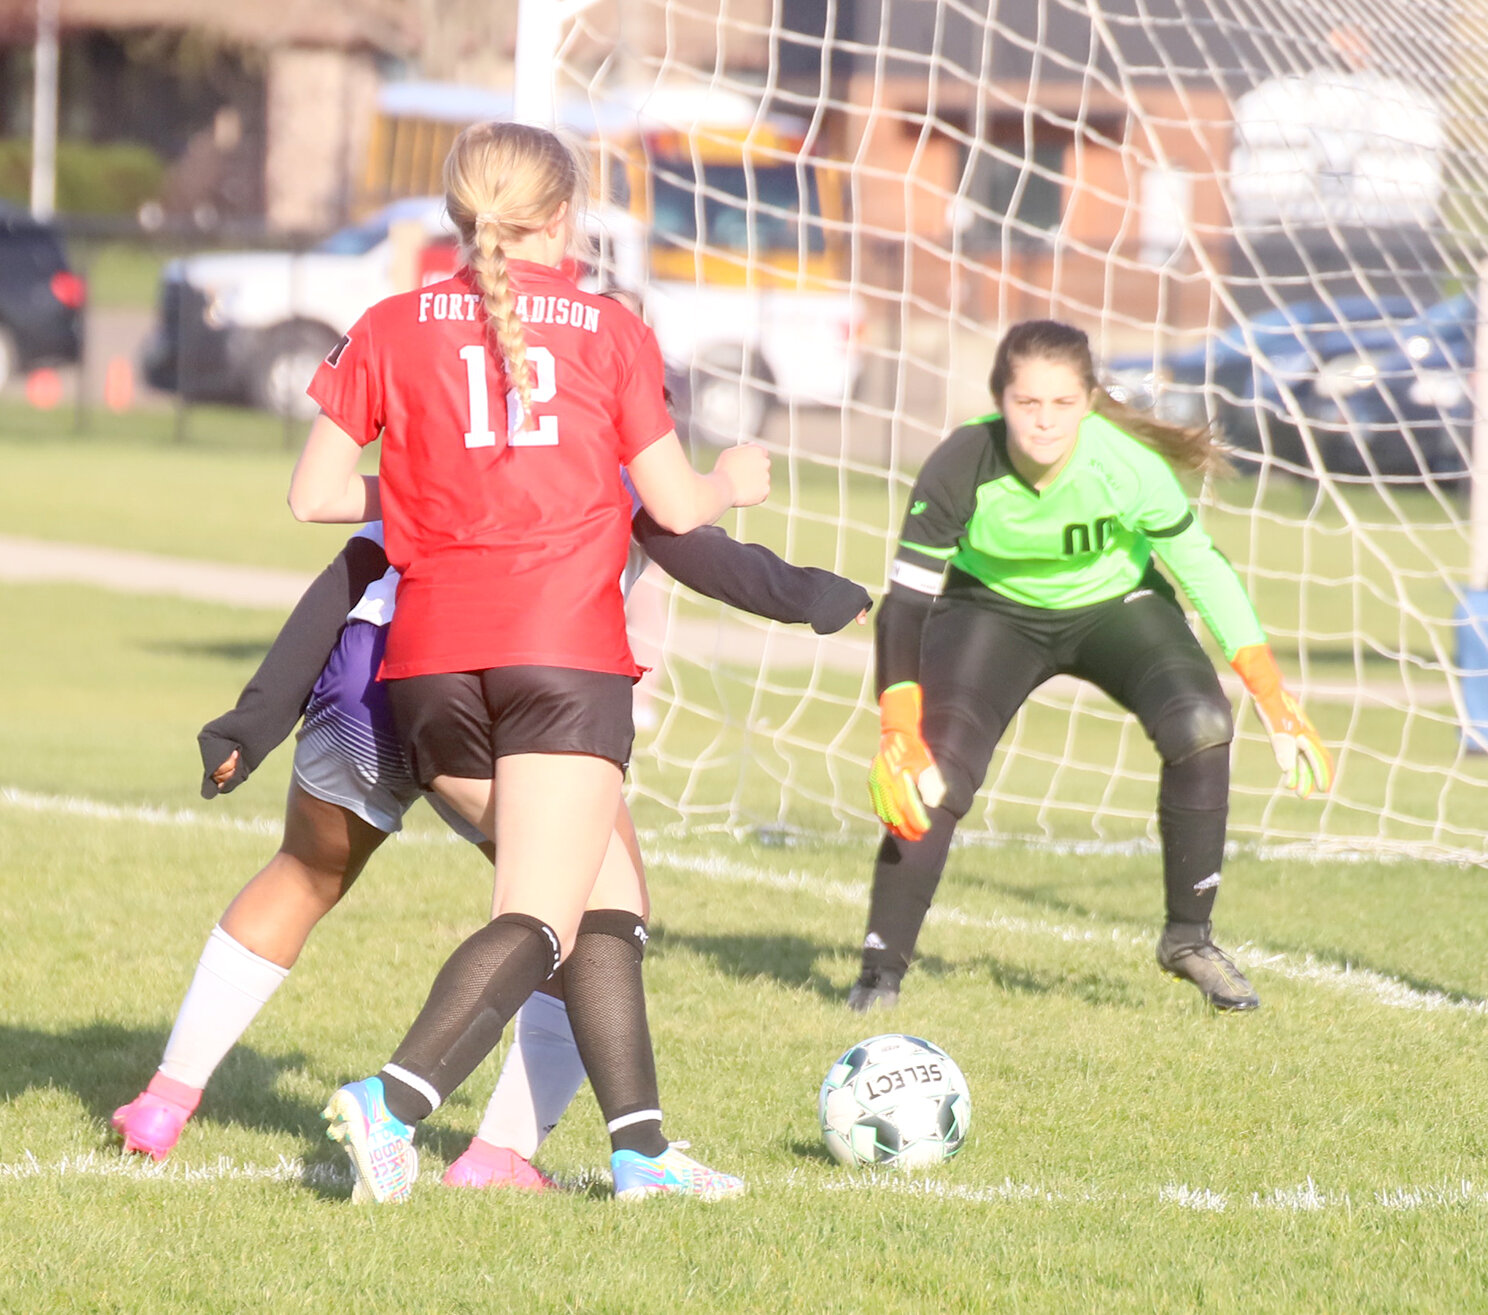 Laura Mehmert (12) tries to square up against the Keokuk keeper in the second half of the Hounds win over Keokuk Monday at Baxter Sports Complex in Fort Madison.